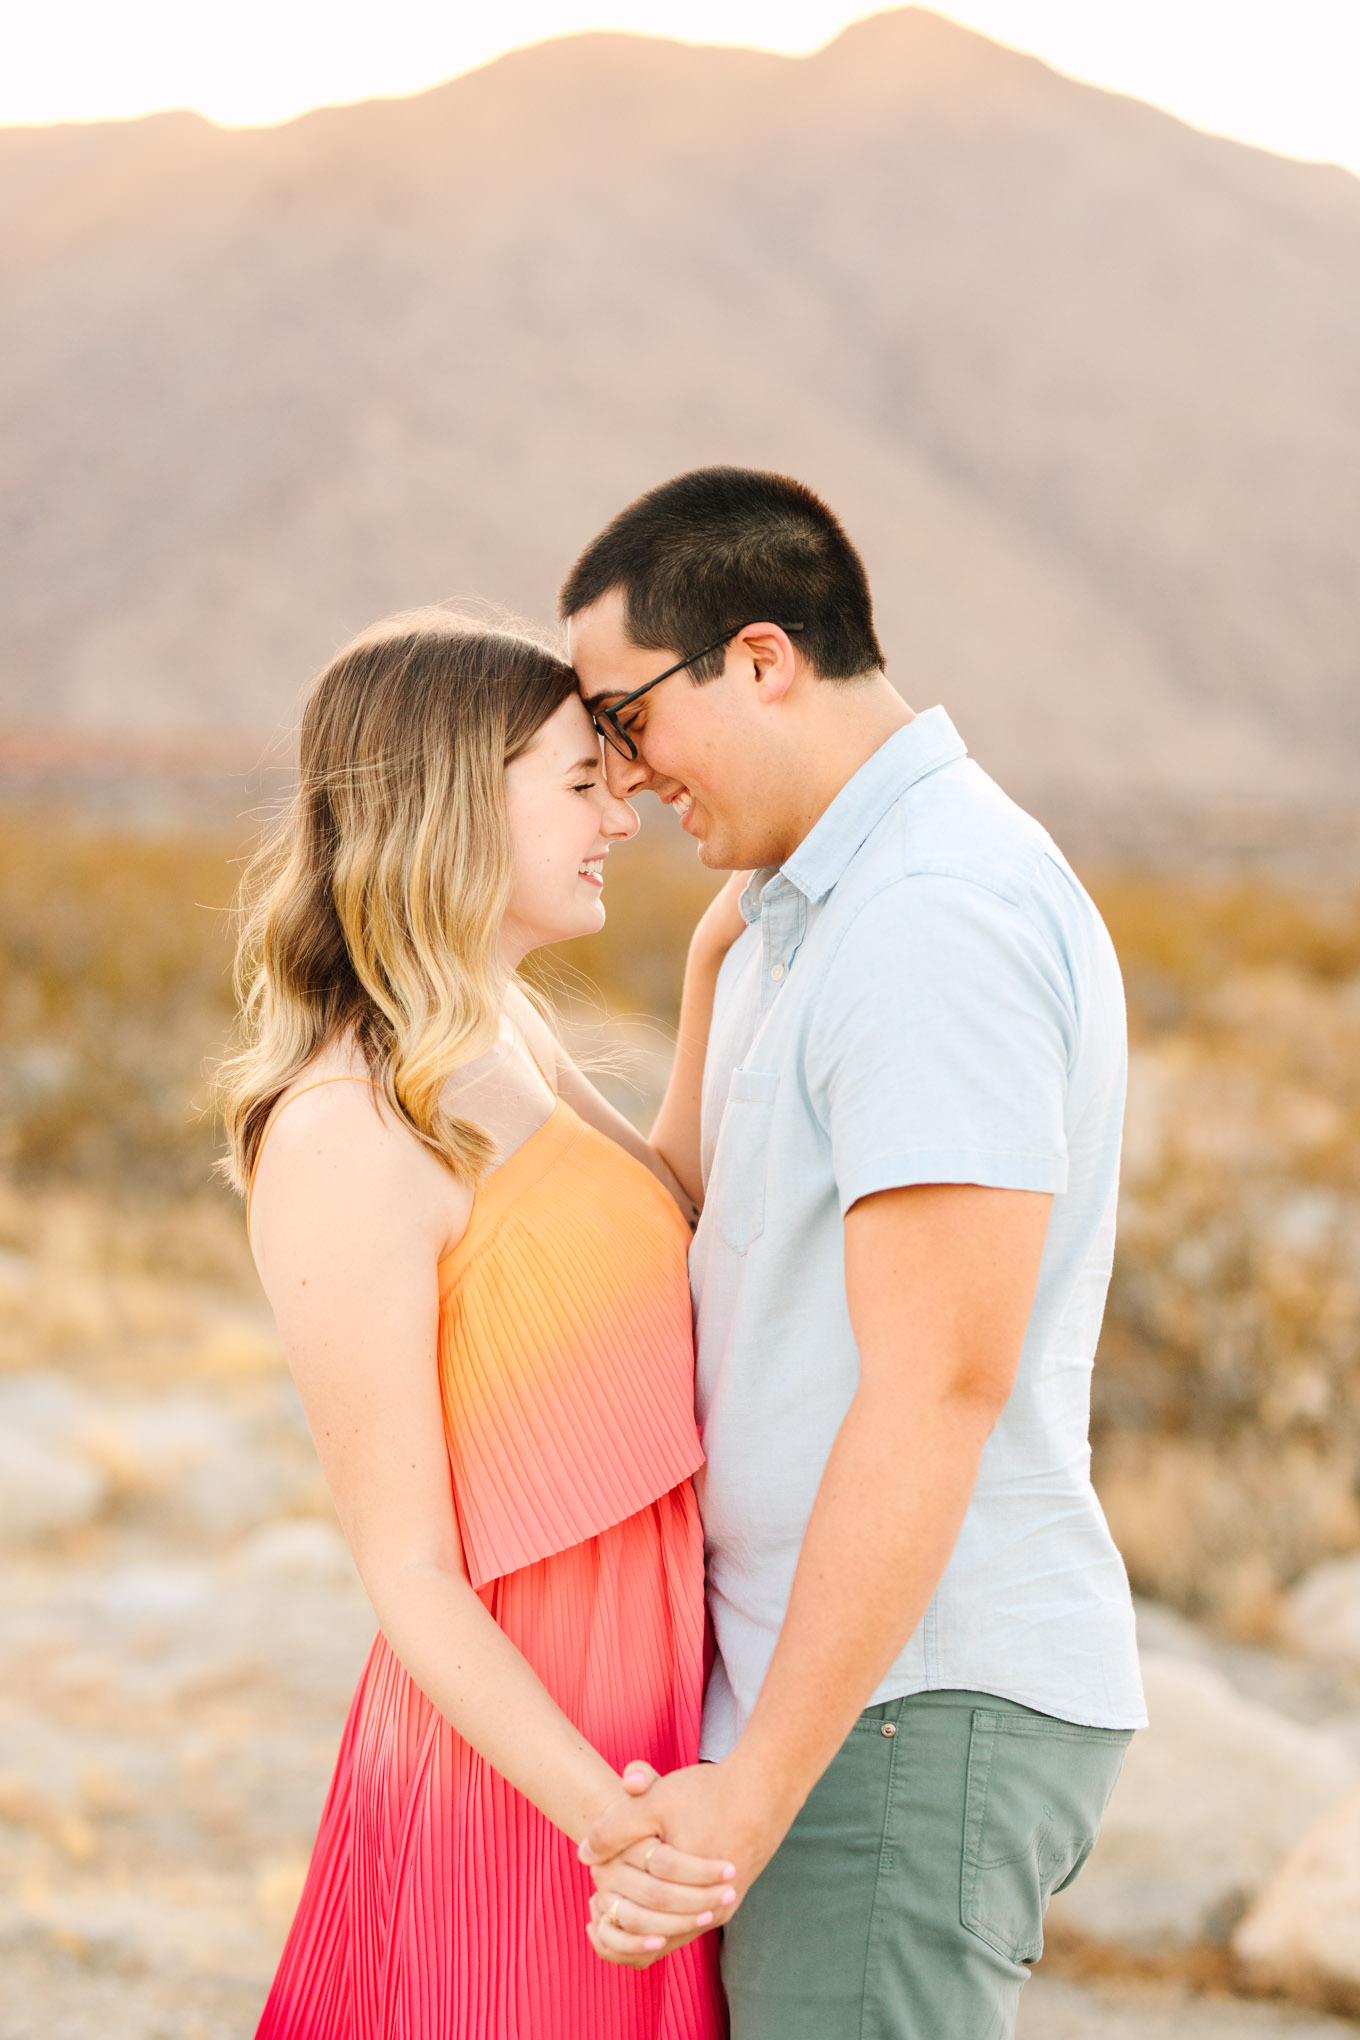 Palm Springs mountain engagement session | Engagement, elopement, and wedding photography roundup of Mary Costa’s favorite images from 2020 | Colorful and elevated photography for fun-loving couples in Southern California | #2020wedding #elopement #weddingphoto #weddingphotography #microwedding   Source: Mary Costa Photography | Los Angeles